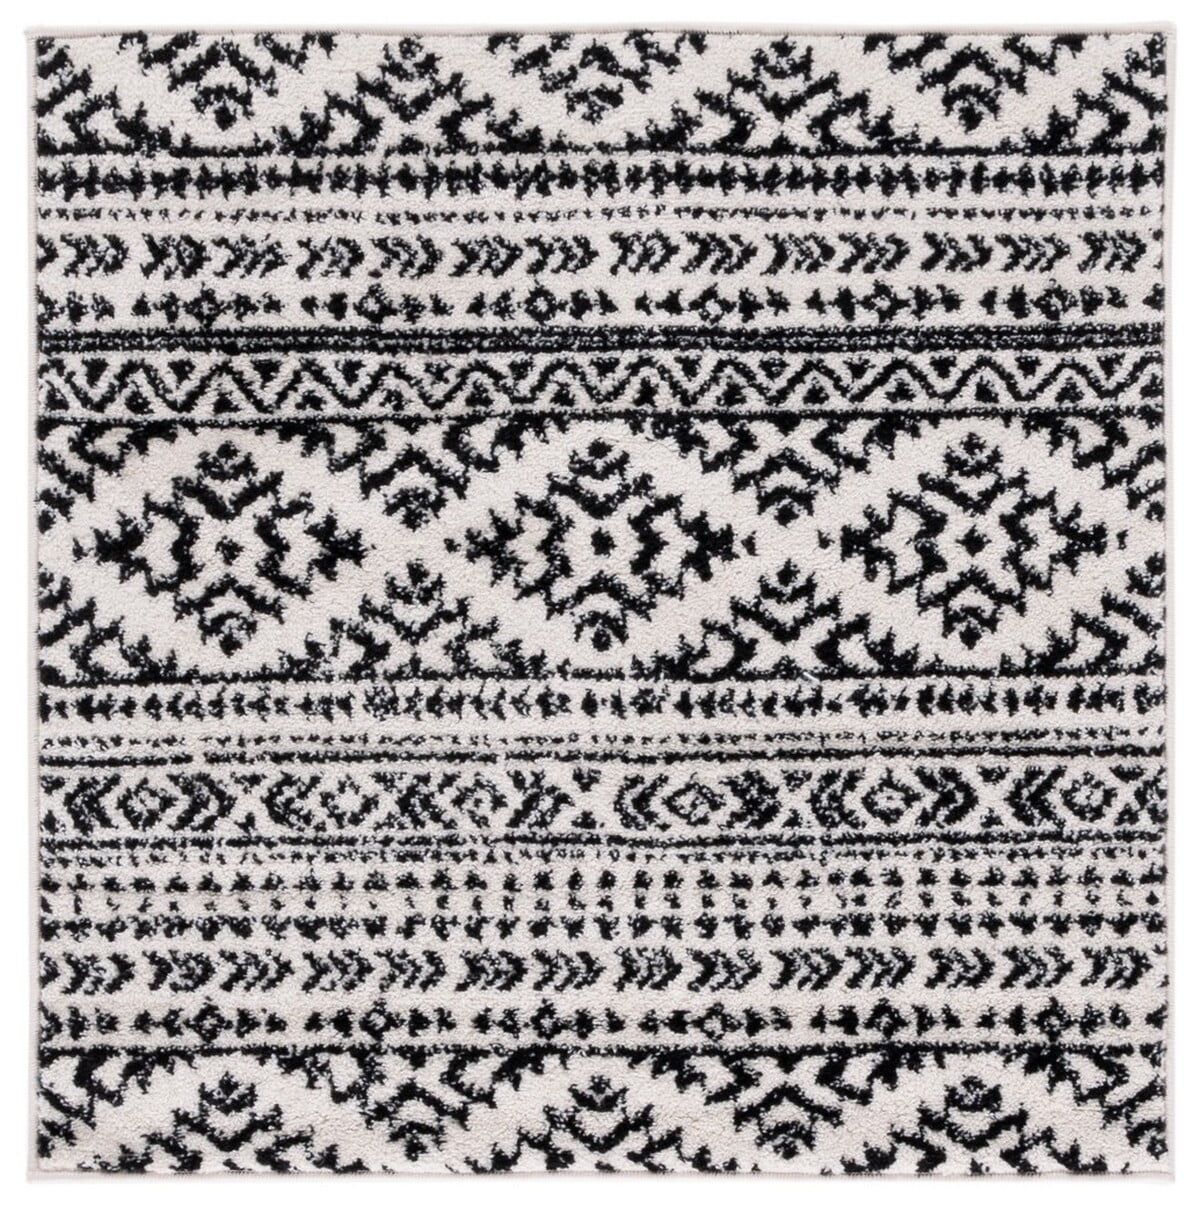 Ivory and Black Synthetic Square Area Rug, 10' x 10'